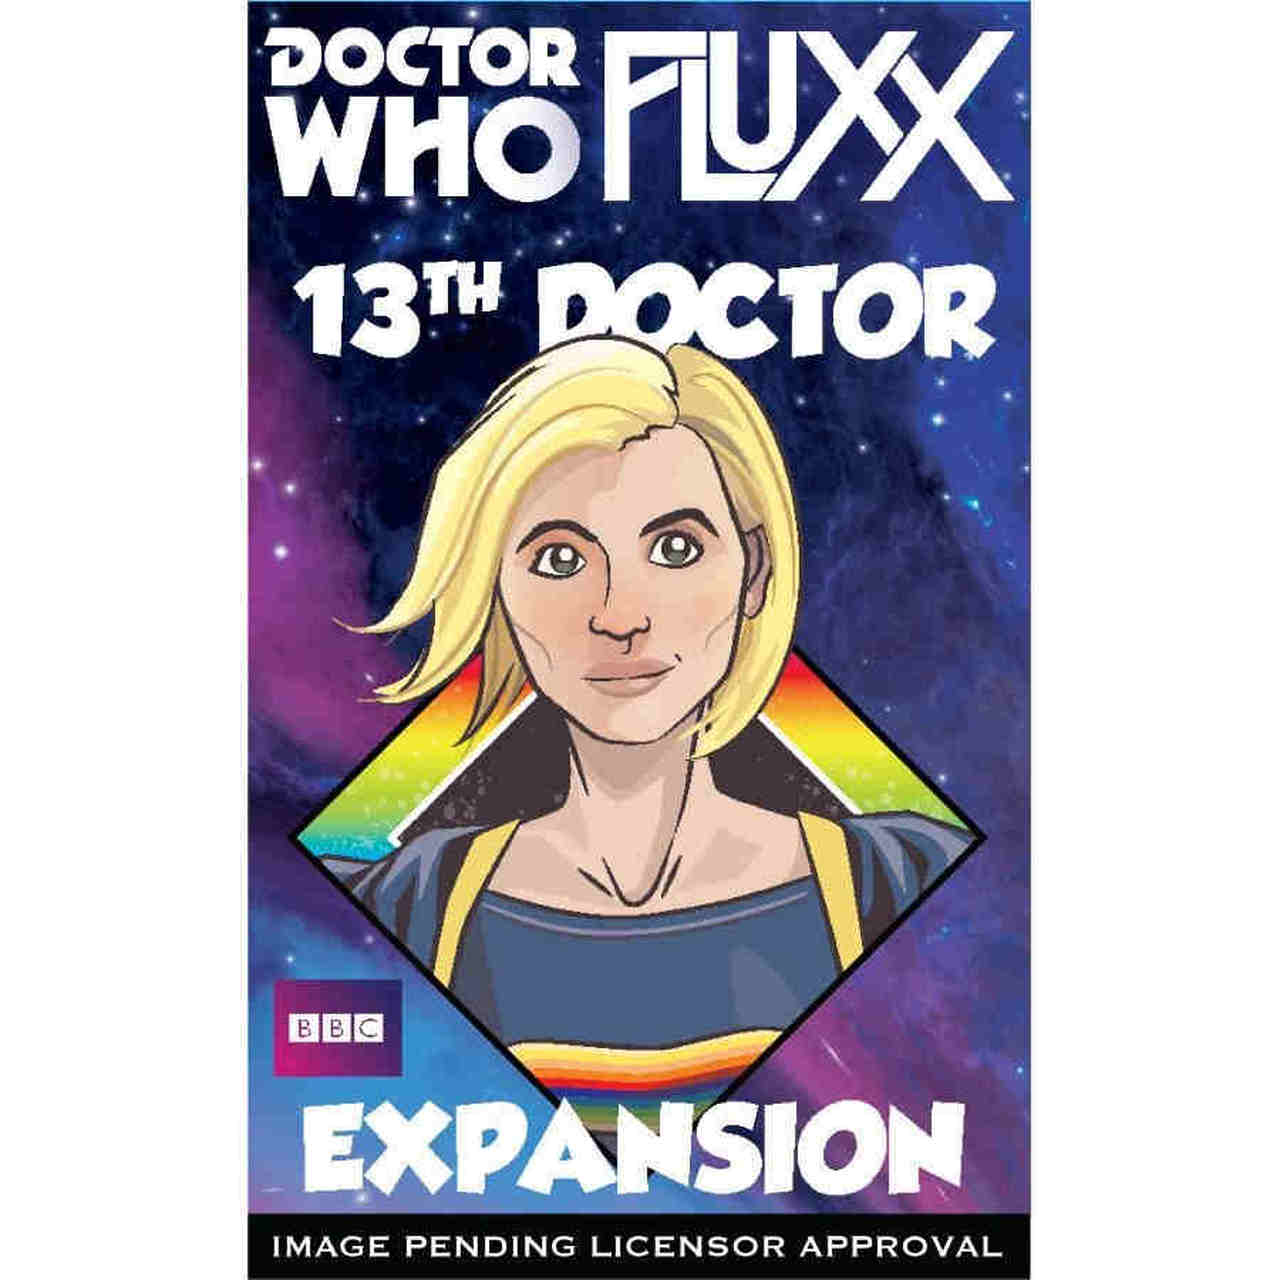 (BSG Certified USED) Doctor Who Fluxx 13th Doctor